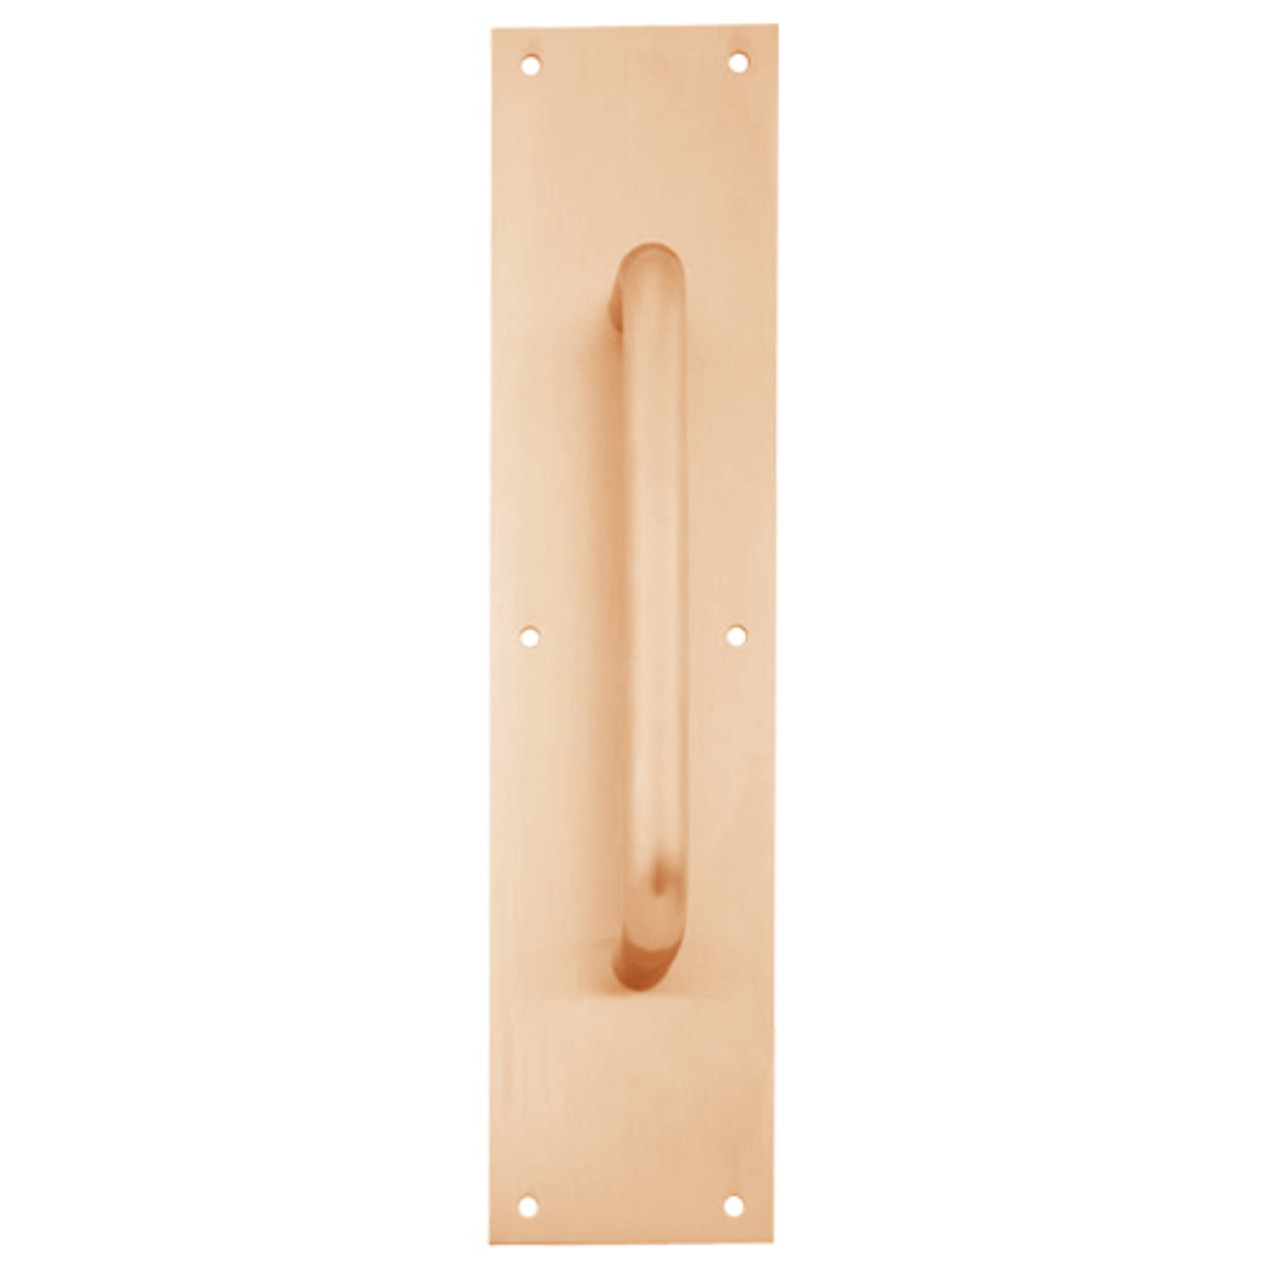 8302-6-US10-4x16 IVES Architectural Door Trim 4x16 Inch Pull Plate in Satin Bronze